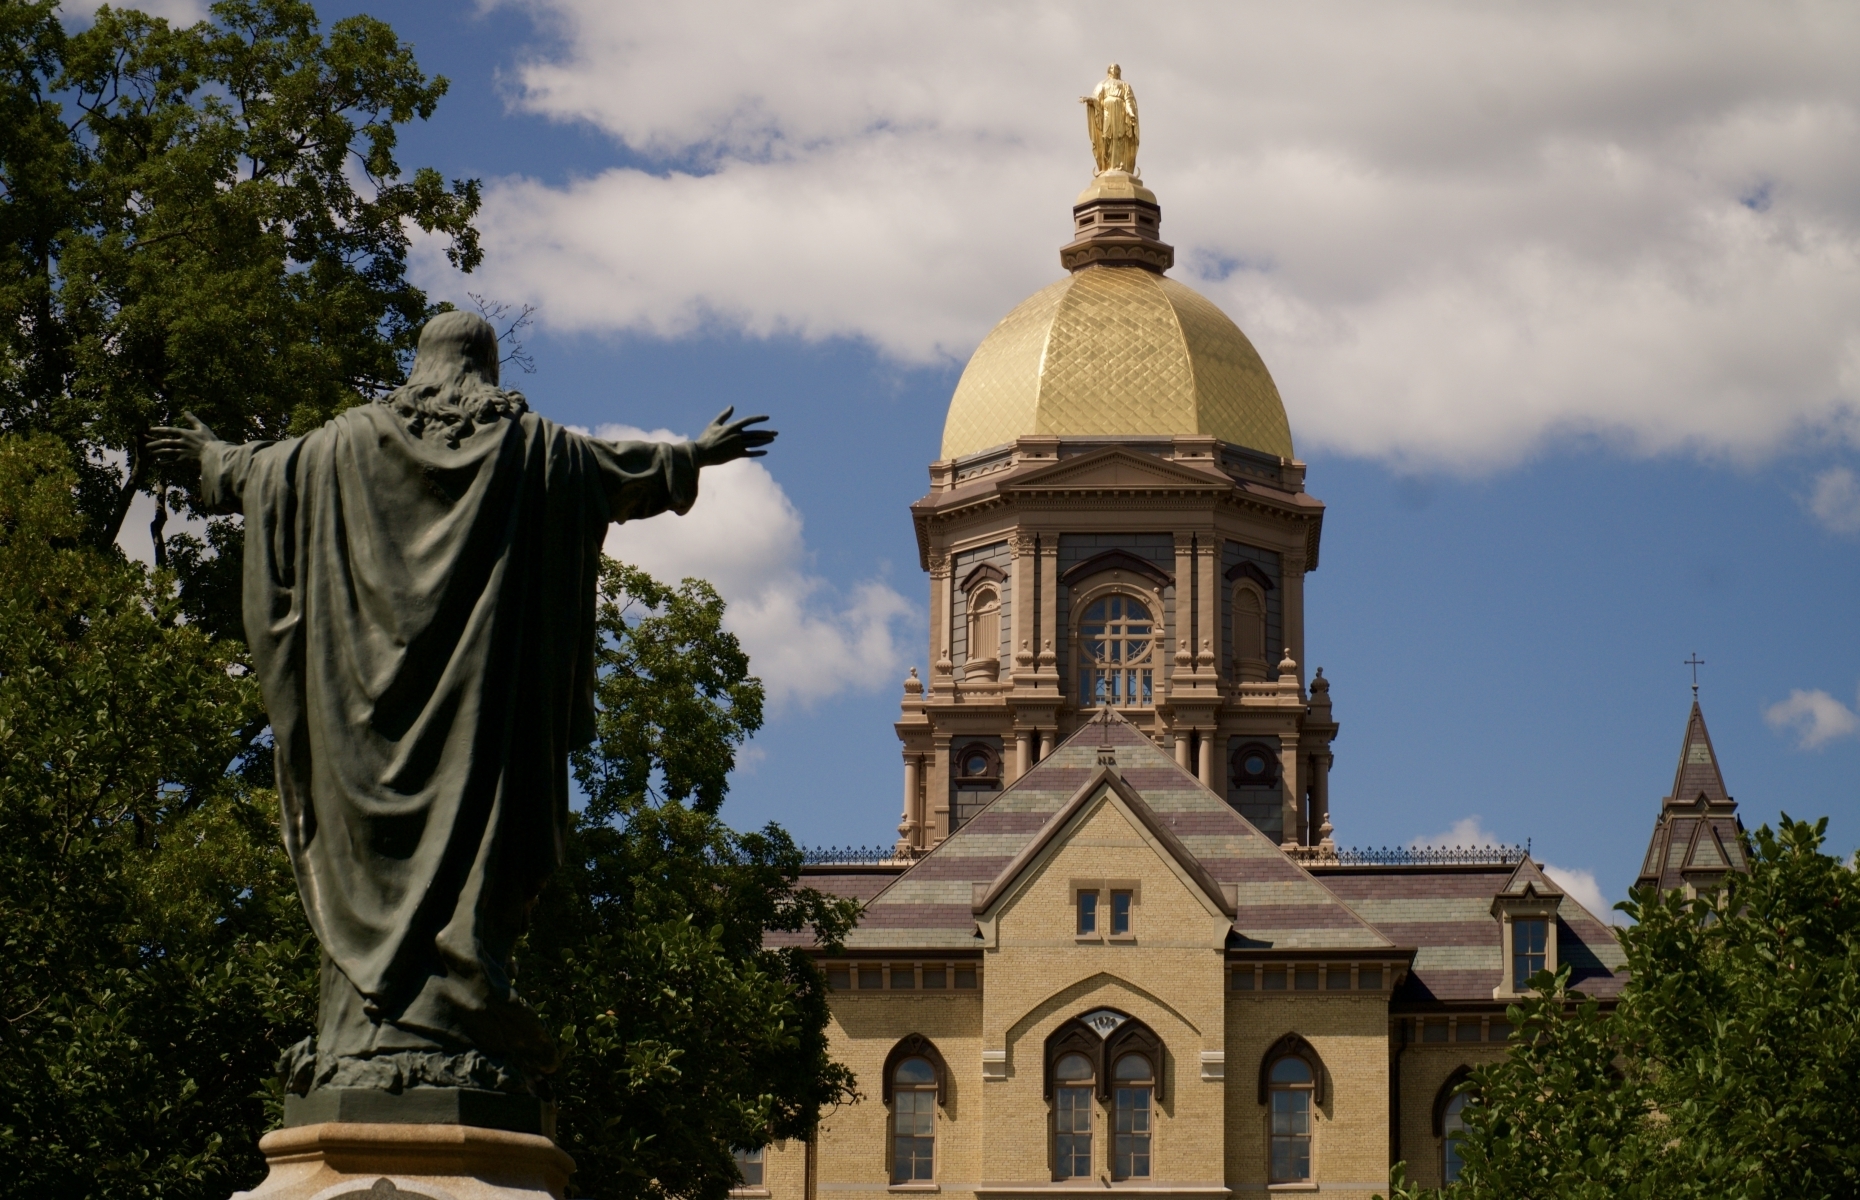 <p>The <a href="https://www.nd.edu/" rel="noreferrer noopener">University of Notre Dame</a>’s campus includes gorgeous Collegiate Gothic buildings, famous landmarks such as the Golden Dome atop the Main Building, and leafy quads that burst with color in the fall.</p>